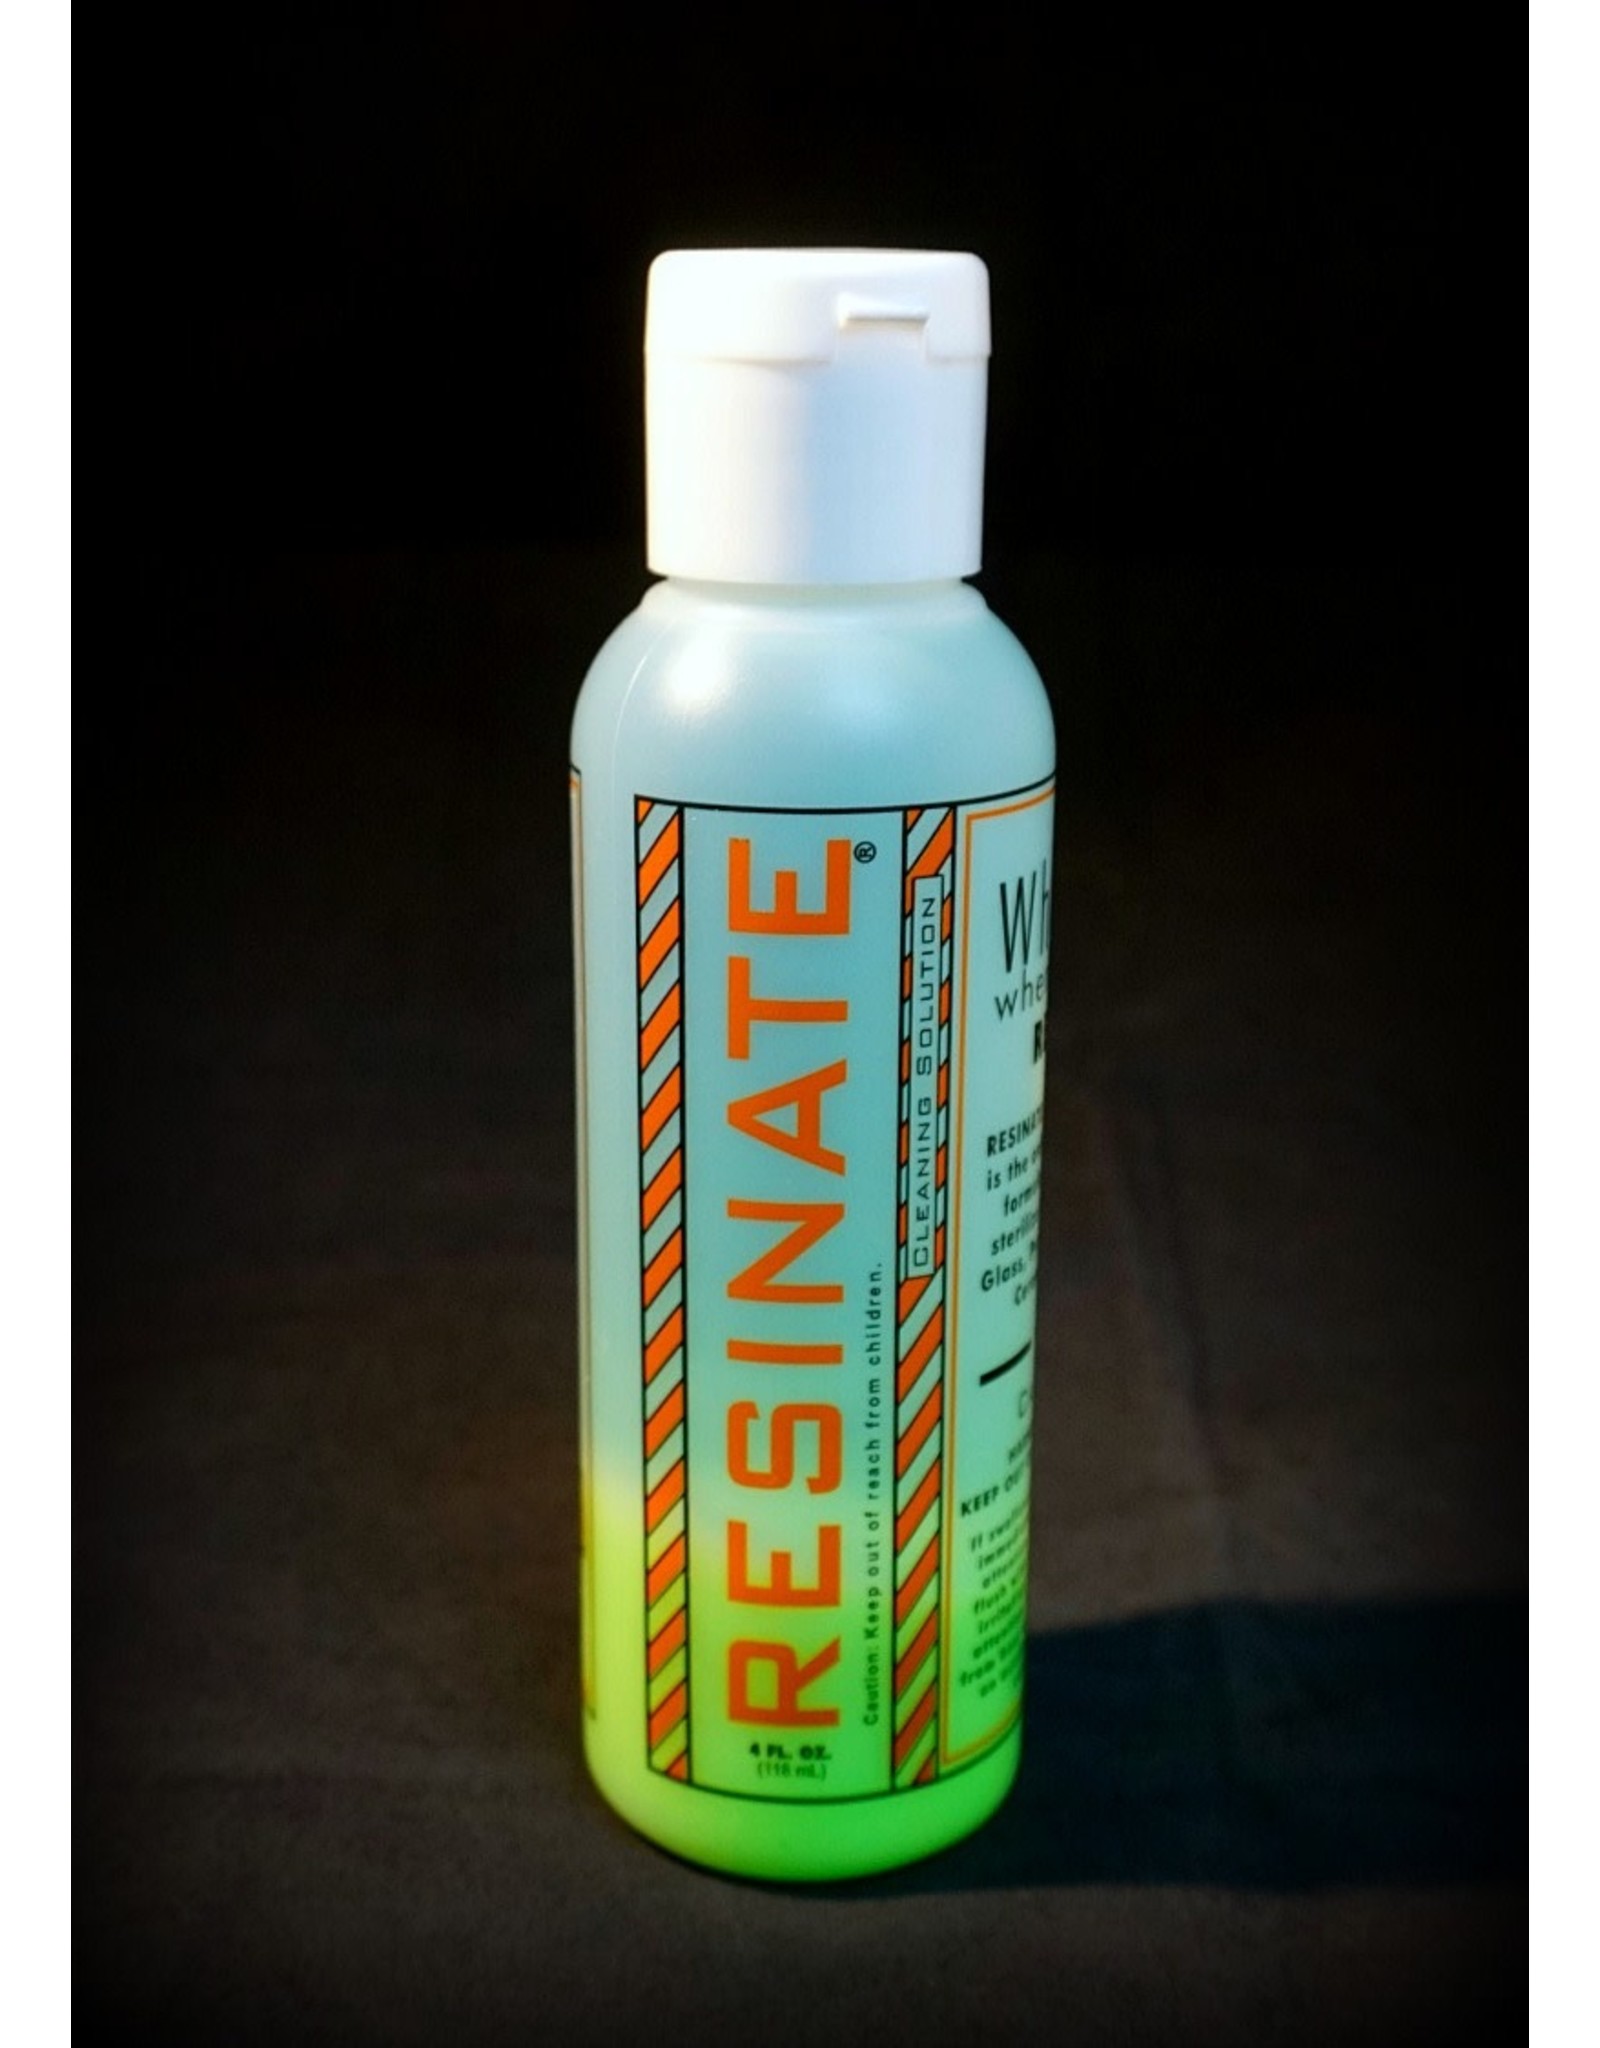 Resinate Cleaning Solution 4oz